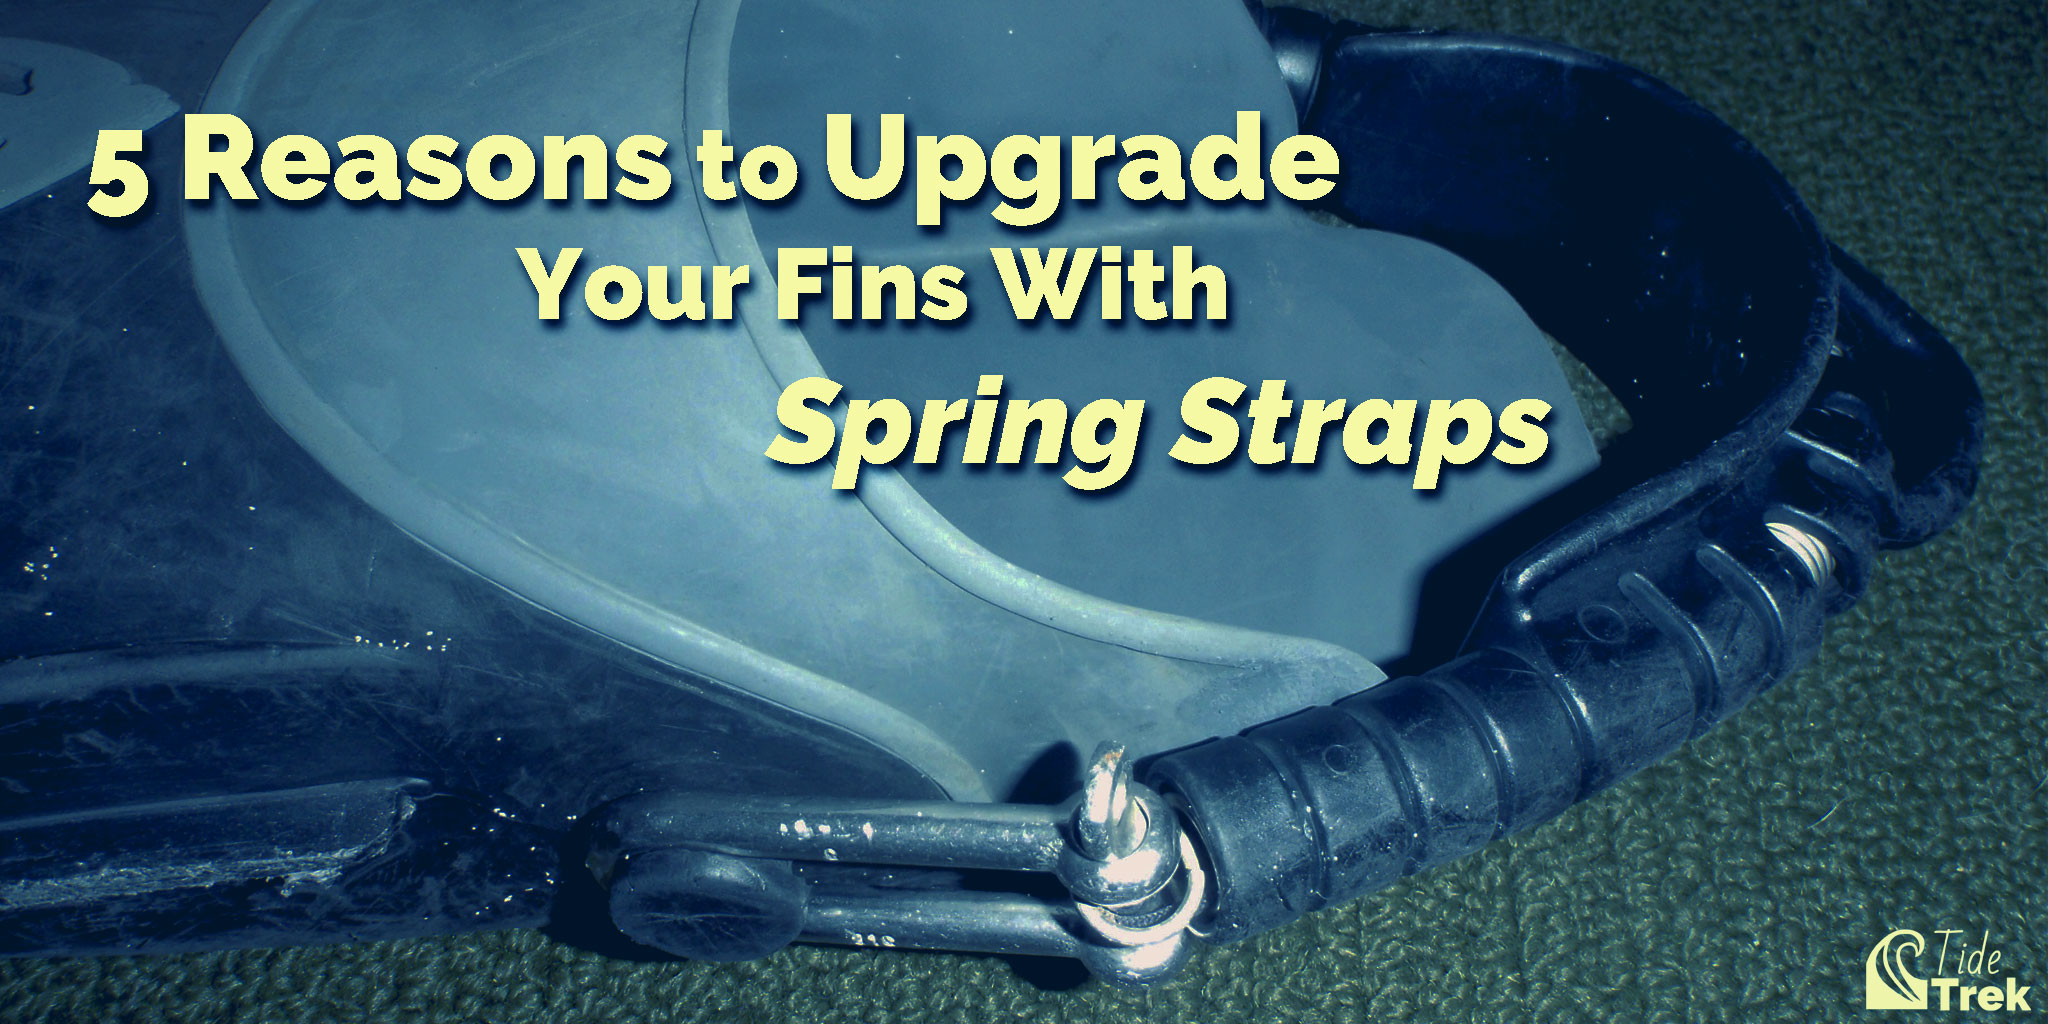 Five reasons to upgrade your fins with spring straps